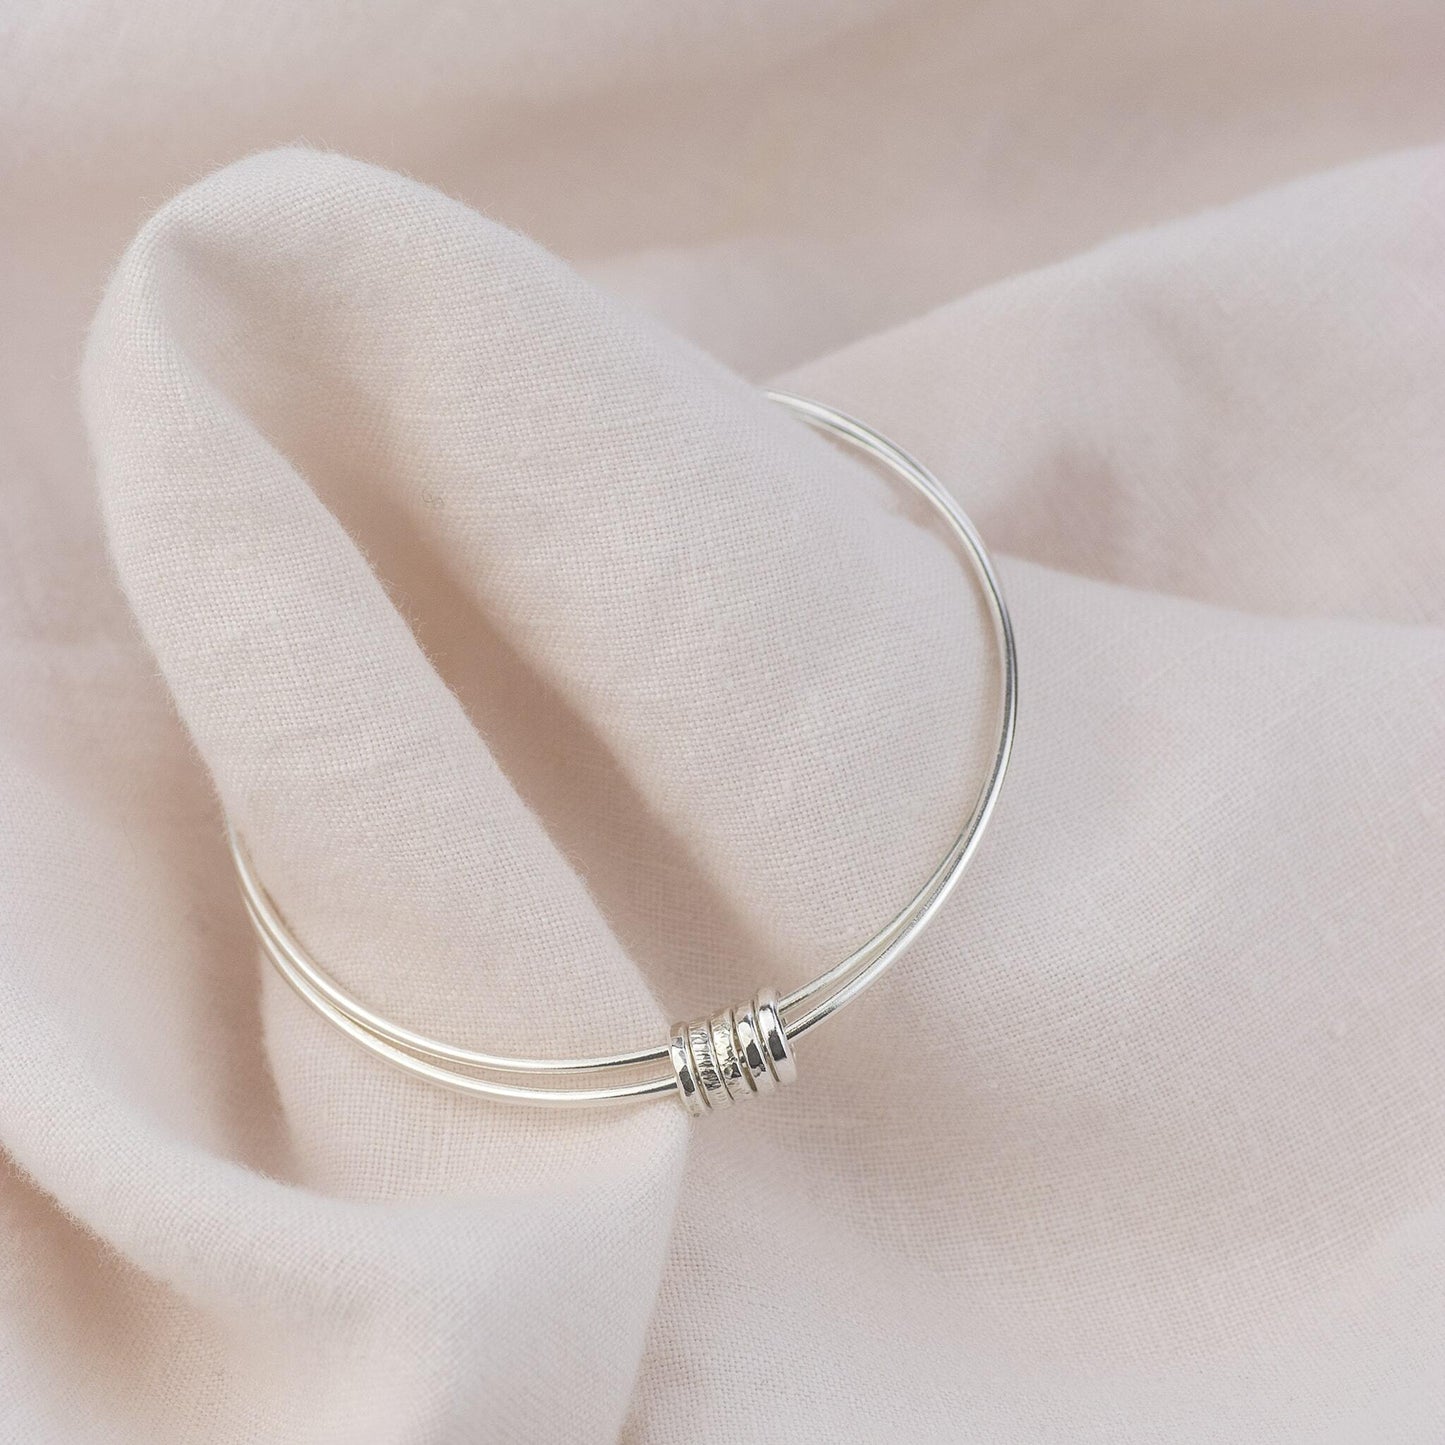 25th Anniversary Gift - Silver Wedding Anniversary - Double Linked Bangle